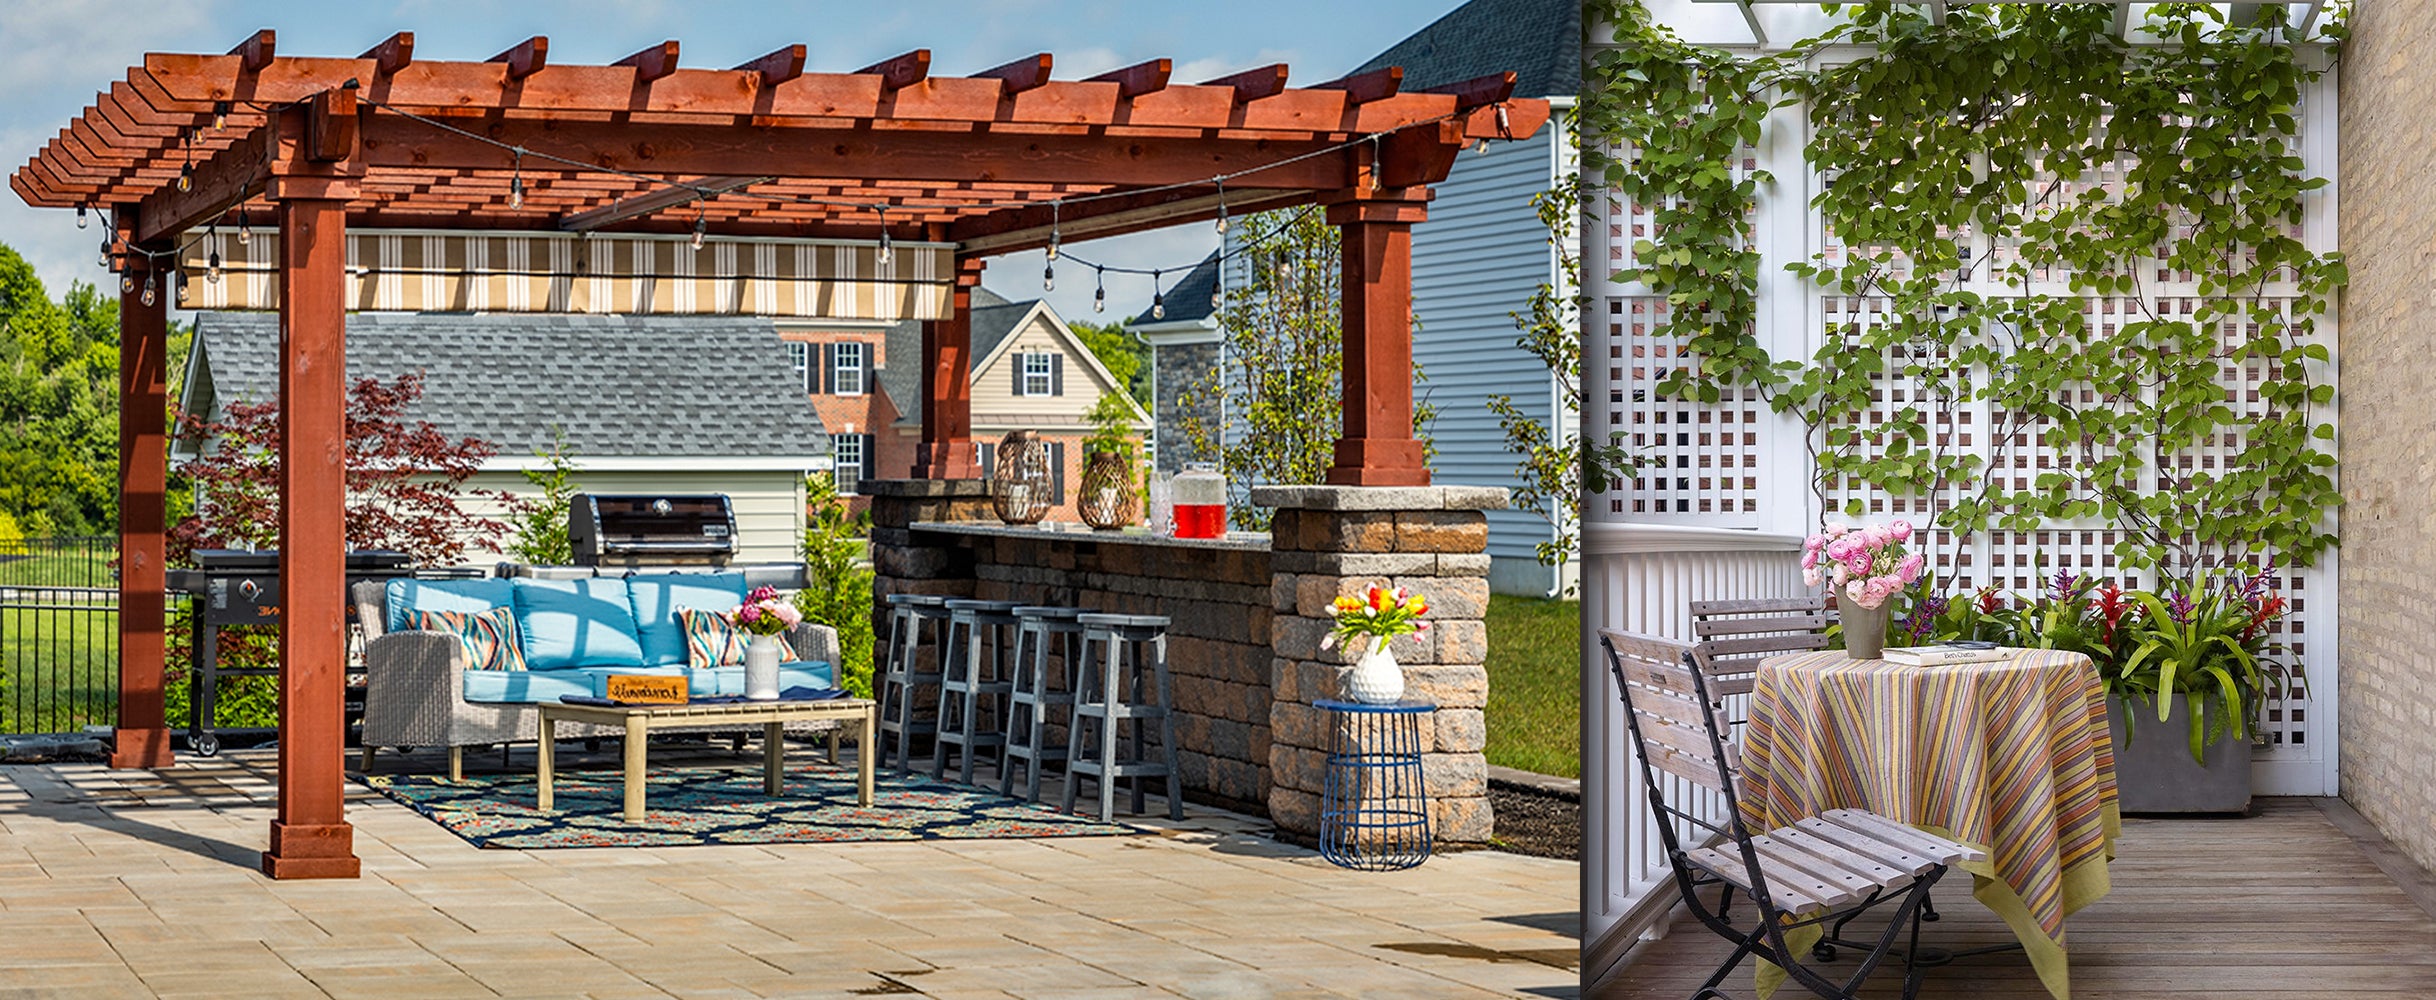 pergola with one side on an elevated brick foundation and white trellis with plants